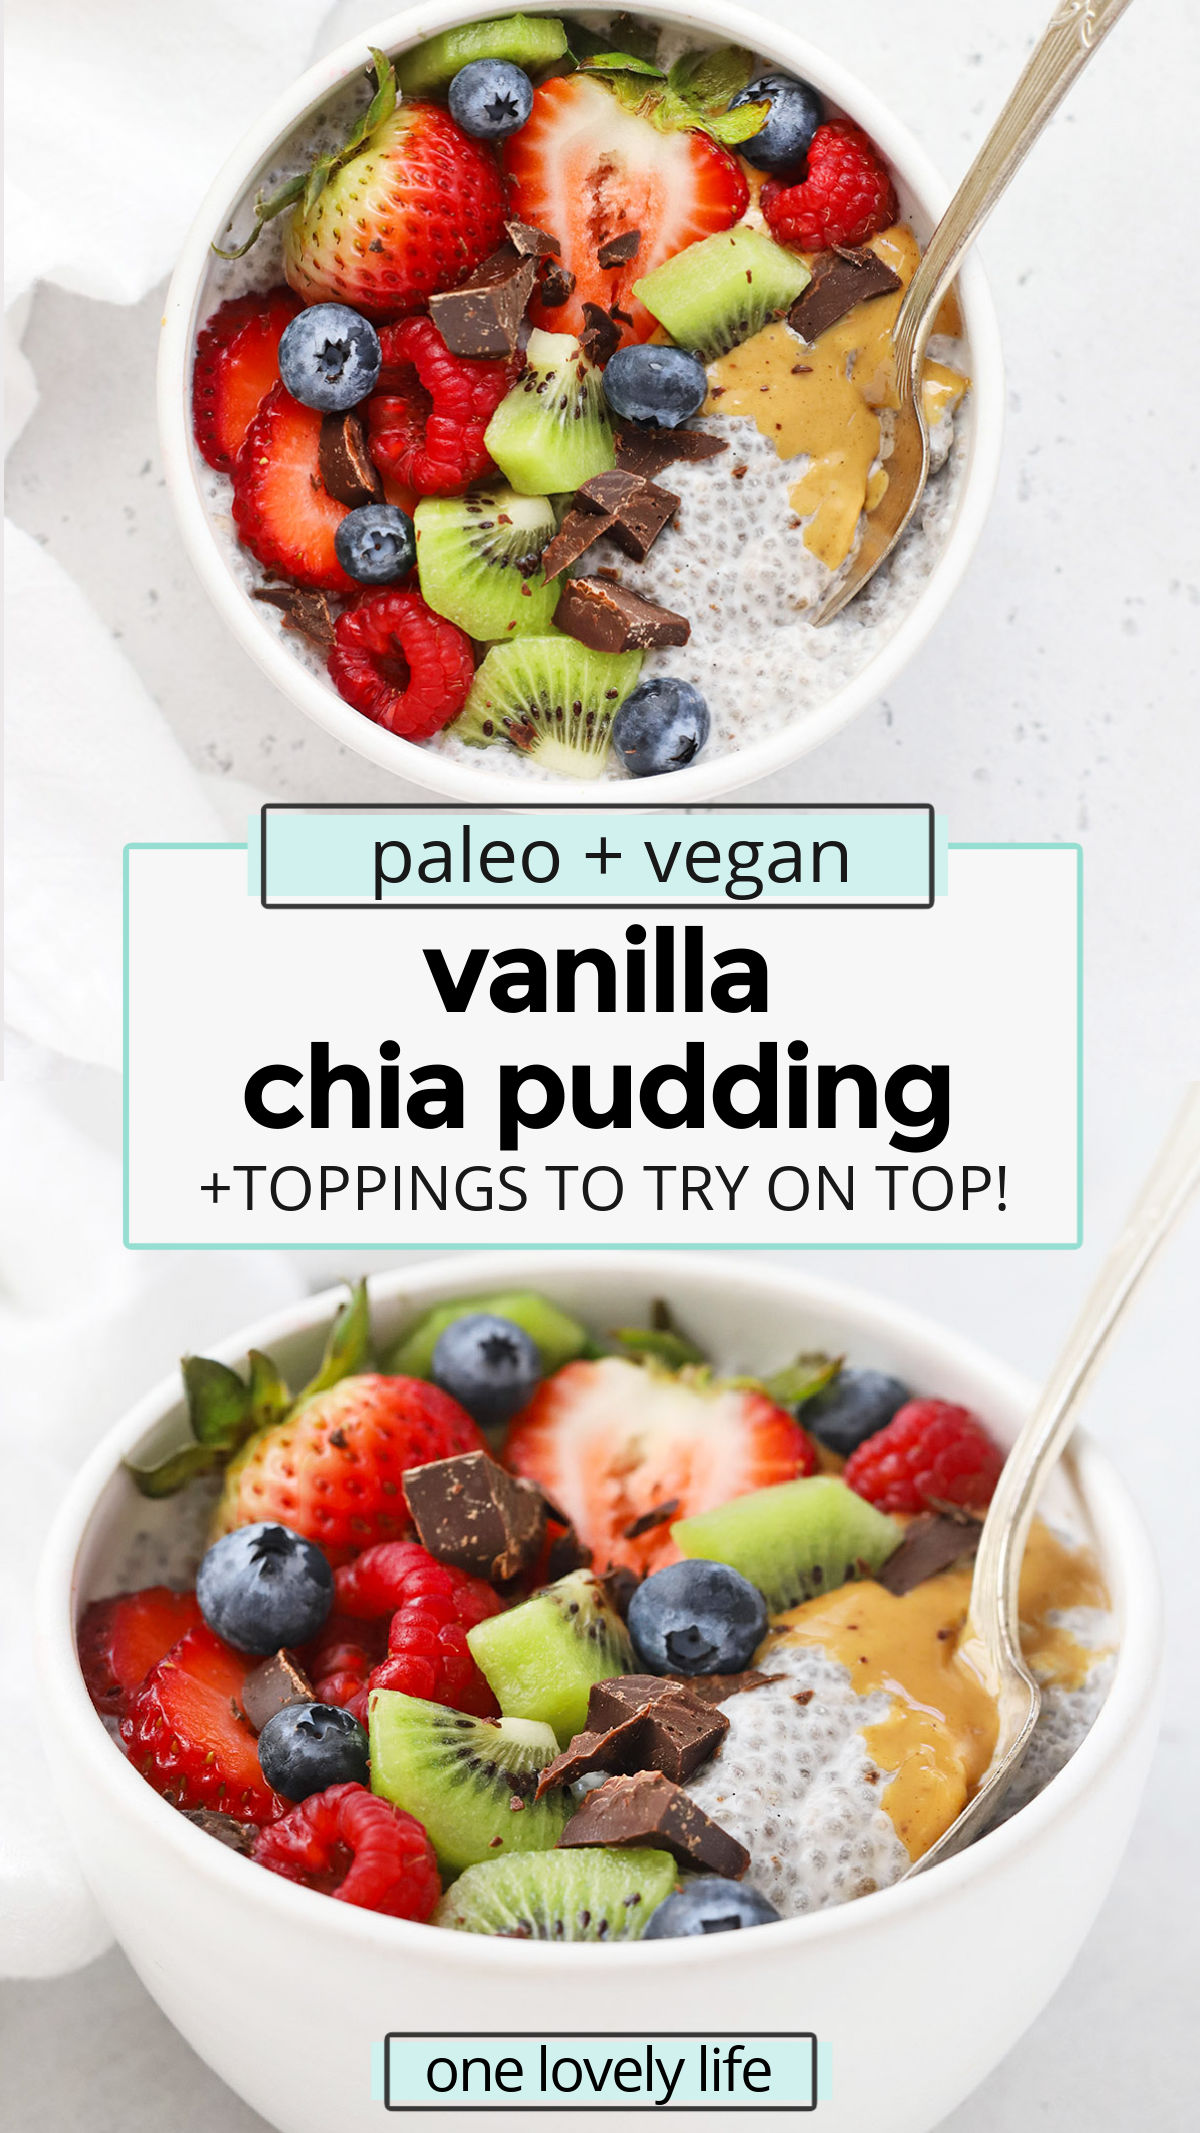 Vanilla Chia Pudding - This easy vanilla chia seed pudding makes a perfect meal prep breakfast or healthy snack. Don't miss all our toppings to try below! (Paleo, Vegan, Gluten-Free) // vanilla chia pudding recipe // best chia pudding recipe // easy chia pudding // how to make chia pudding / vegan chia pudding / paleo chia pudding / healthy breakfast / healthy dessert / healthy snack / meal prep snack / meal prep breakfast / gluten free breakfast / healthy vanilla pudding